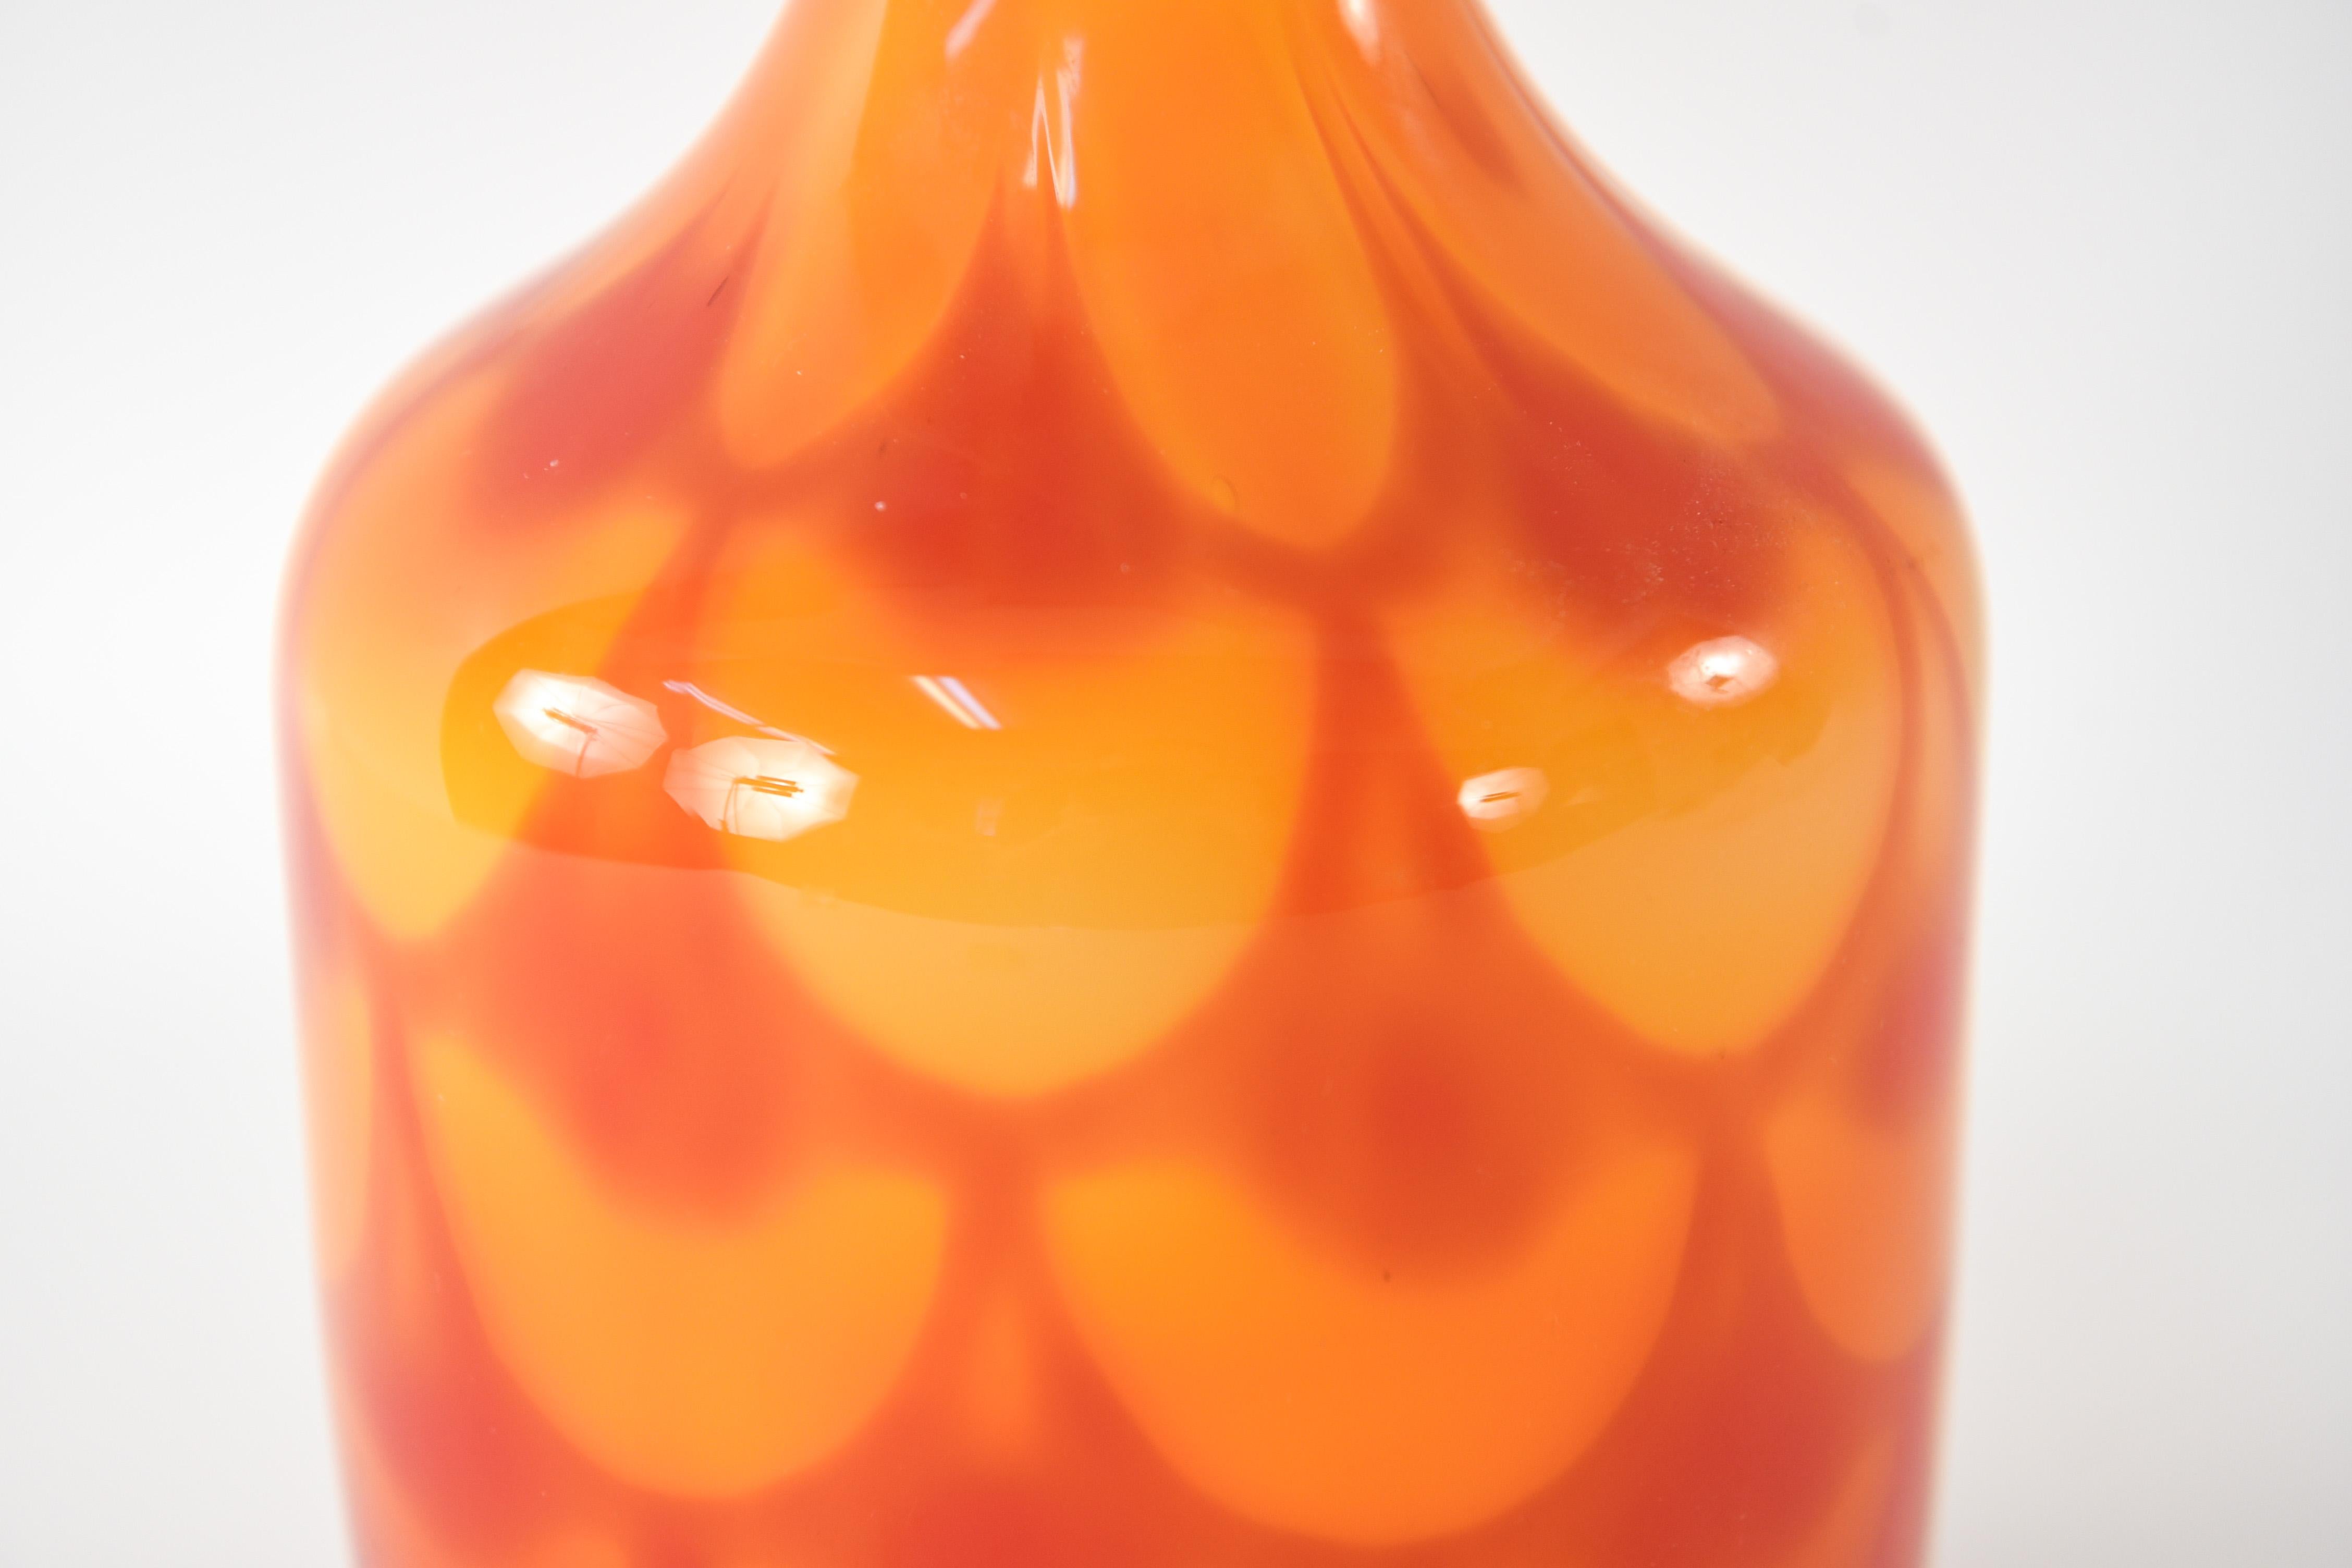 This Swedish midcentury vase is full of warm red and orange hues. This piece would be a lovely place to hold flowers, or can simply act as an accent piece on its own to provide a small pop of bright color to an interior.